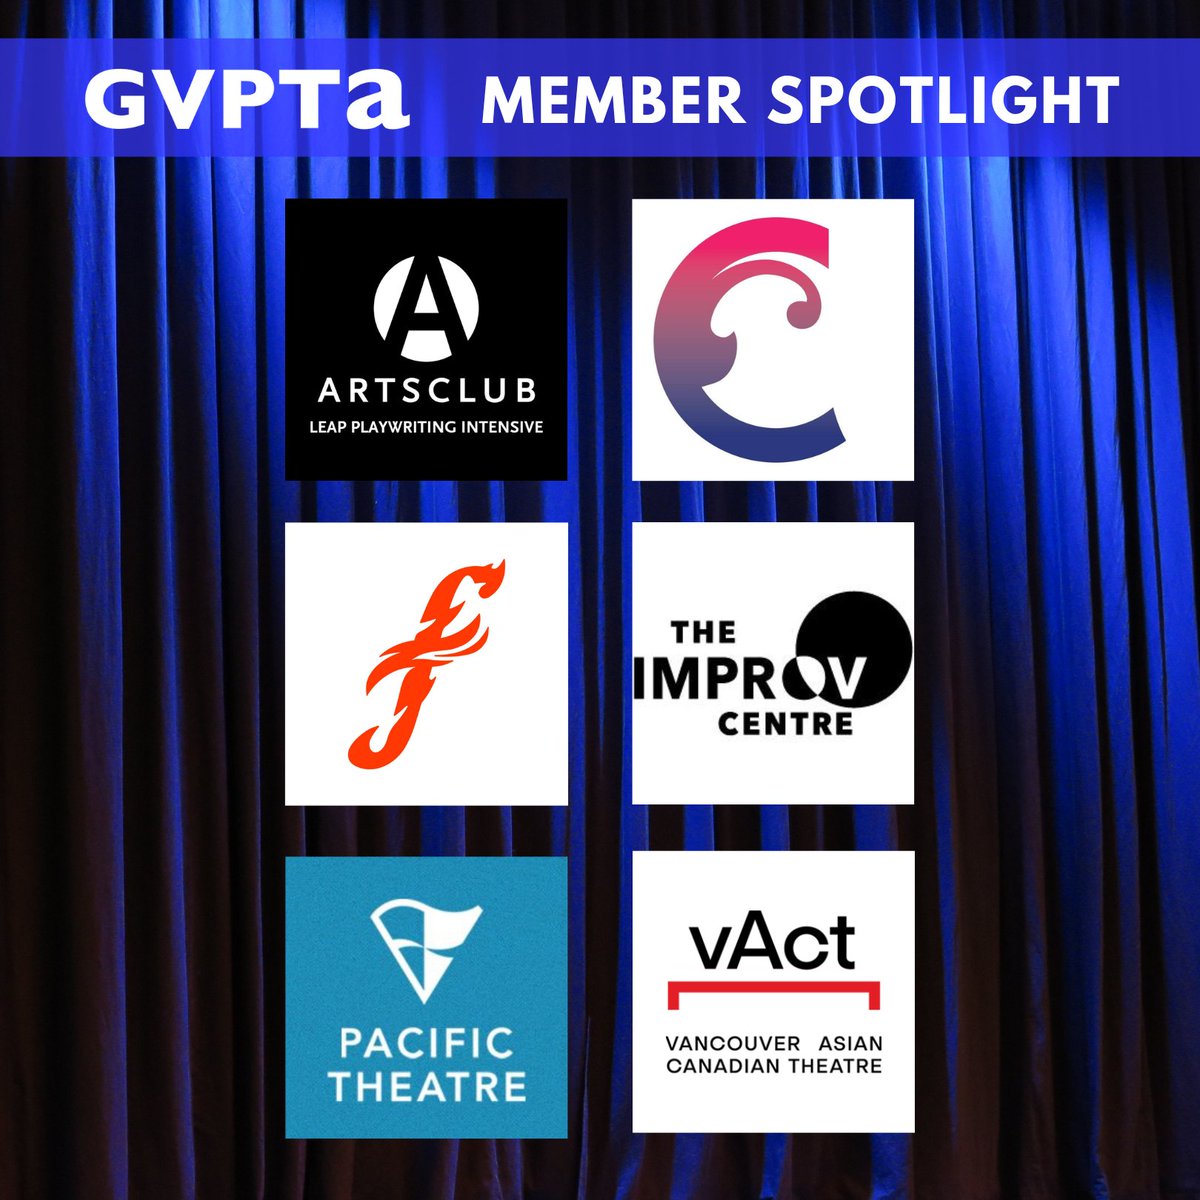 Today's #GVPTA Member Spotlight features 6 Vancouver-based theatre companies: 🎭 @theArtsClub @TheCultch @firehallarts #TheImprovCentre @PacificTheatre @vactheatre gvpta.ca/membership/mem… #YVRTheatre